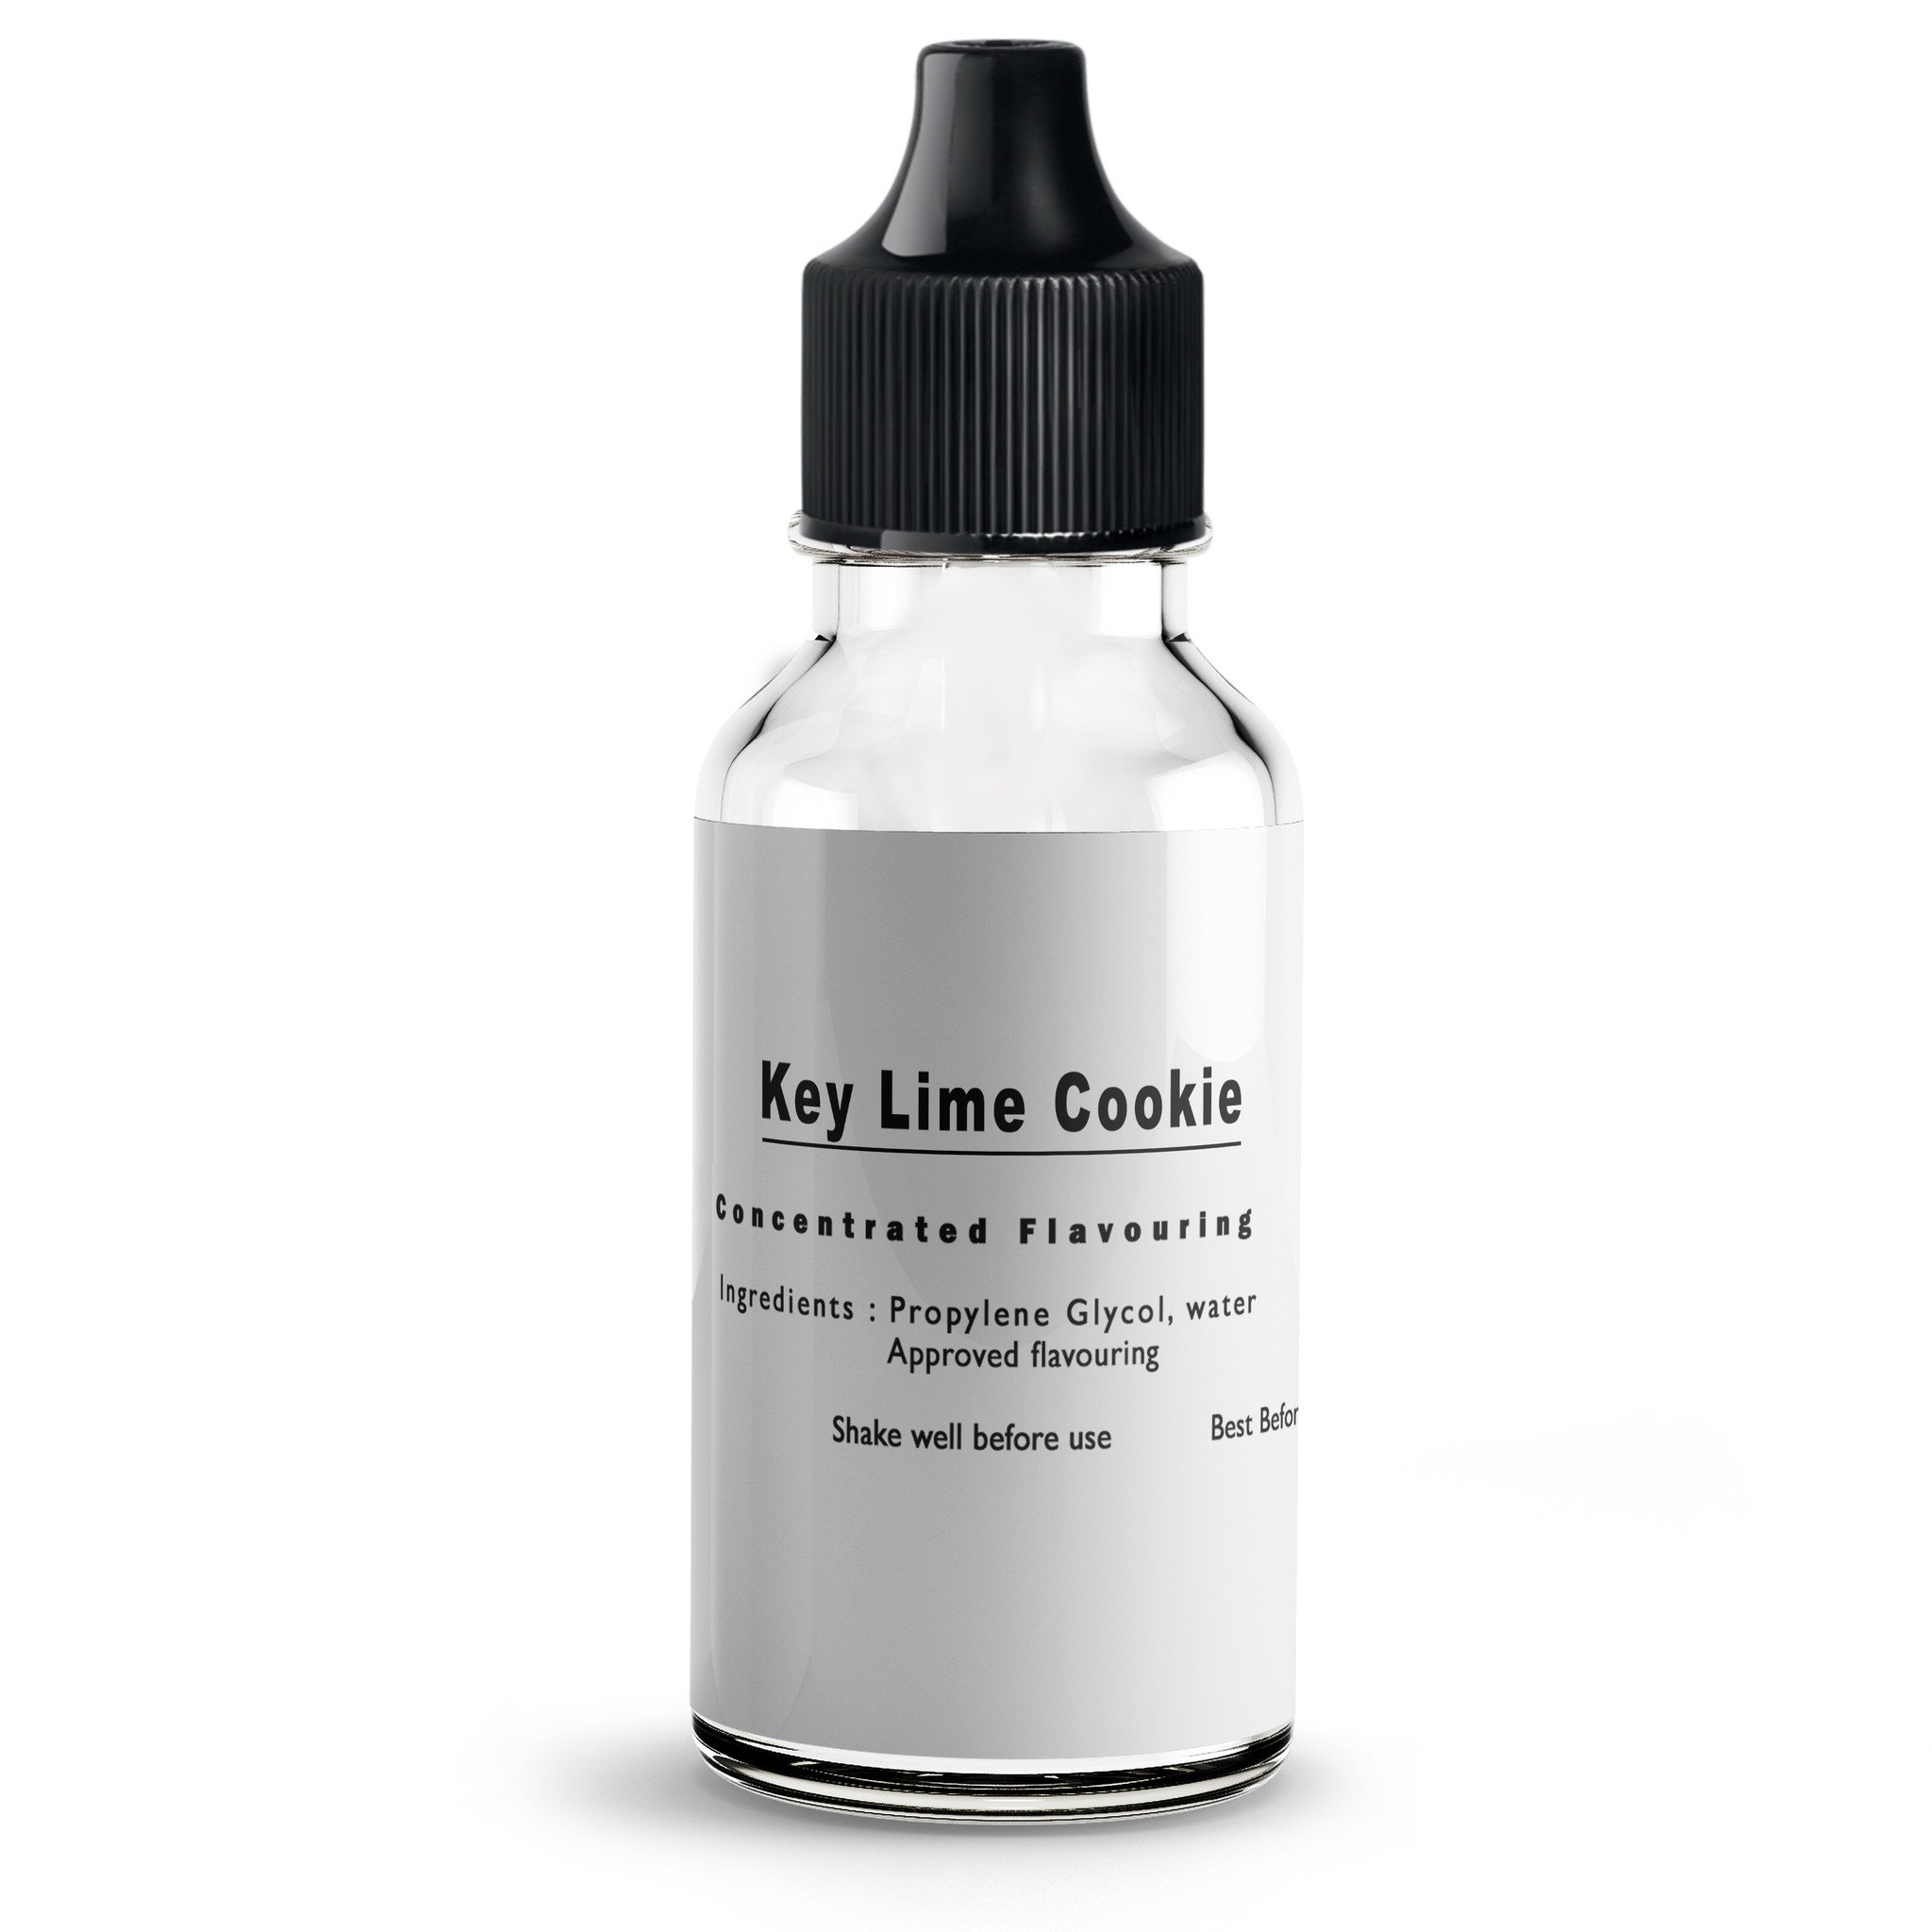 Key Lime Cookie E Liquid Concentrate